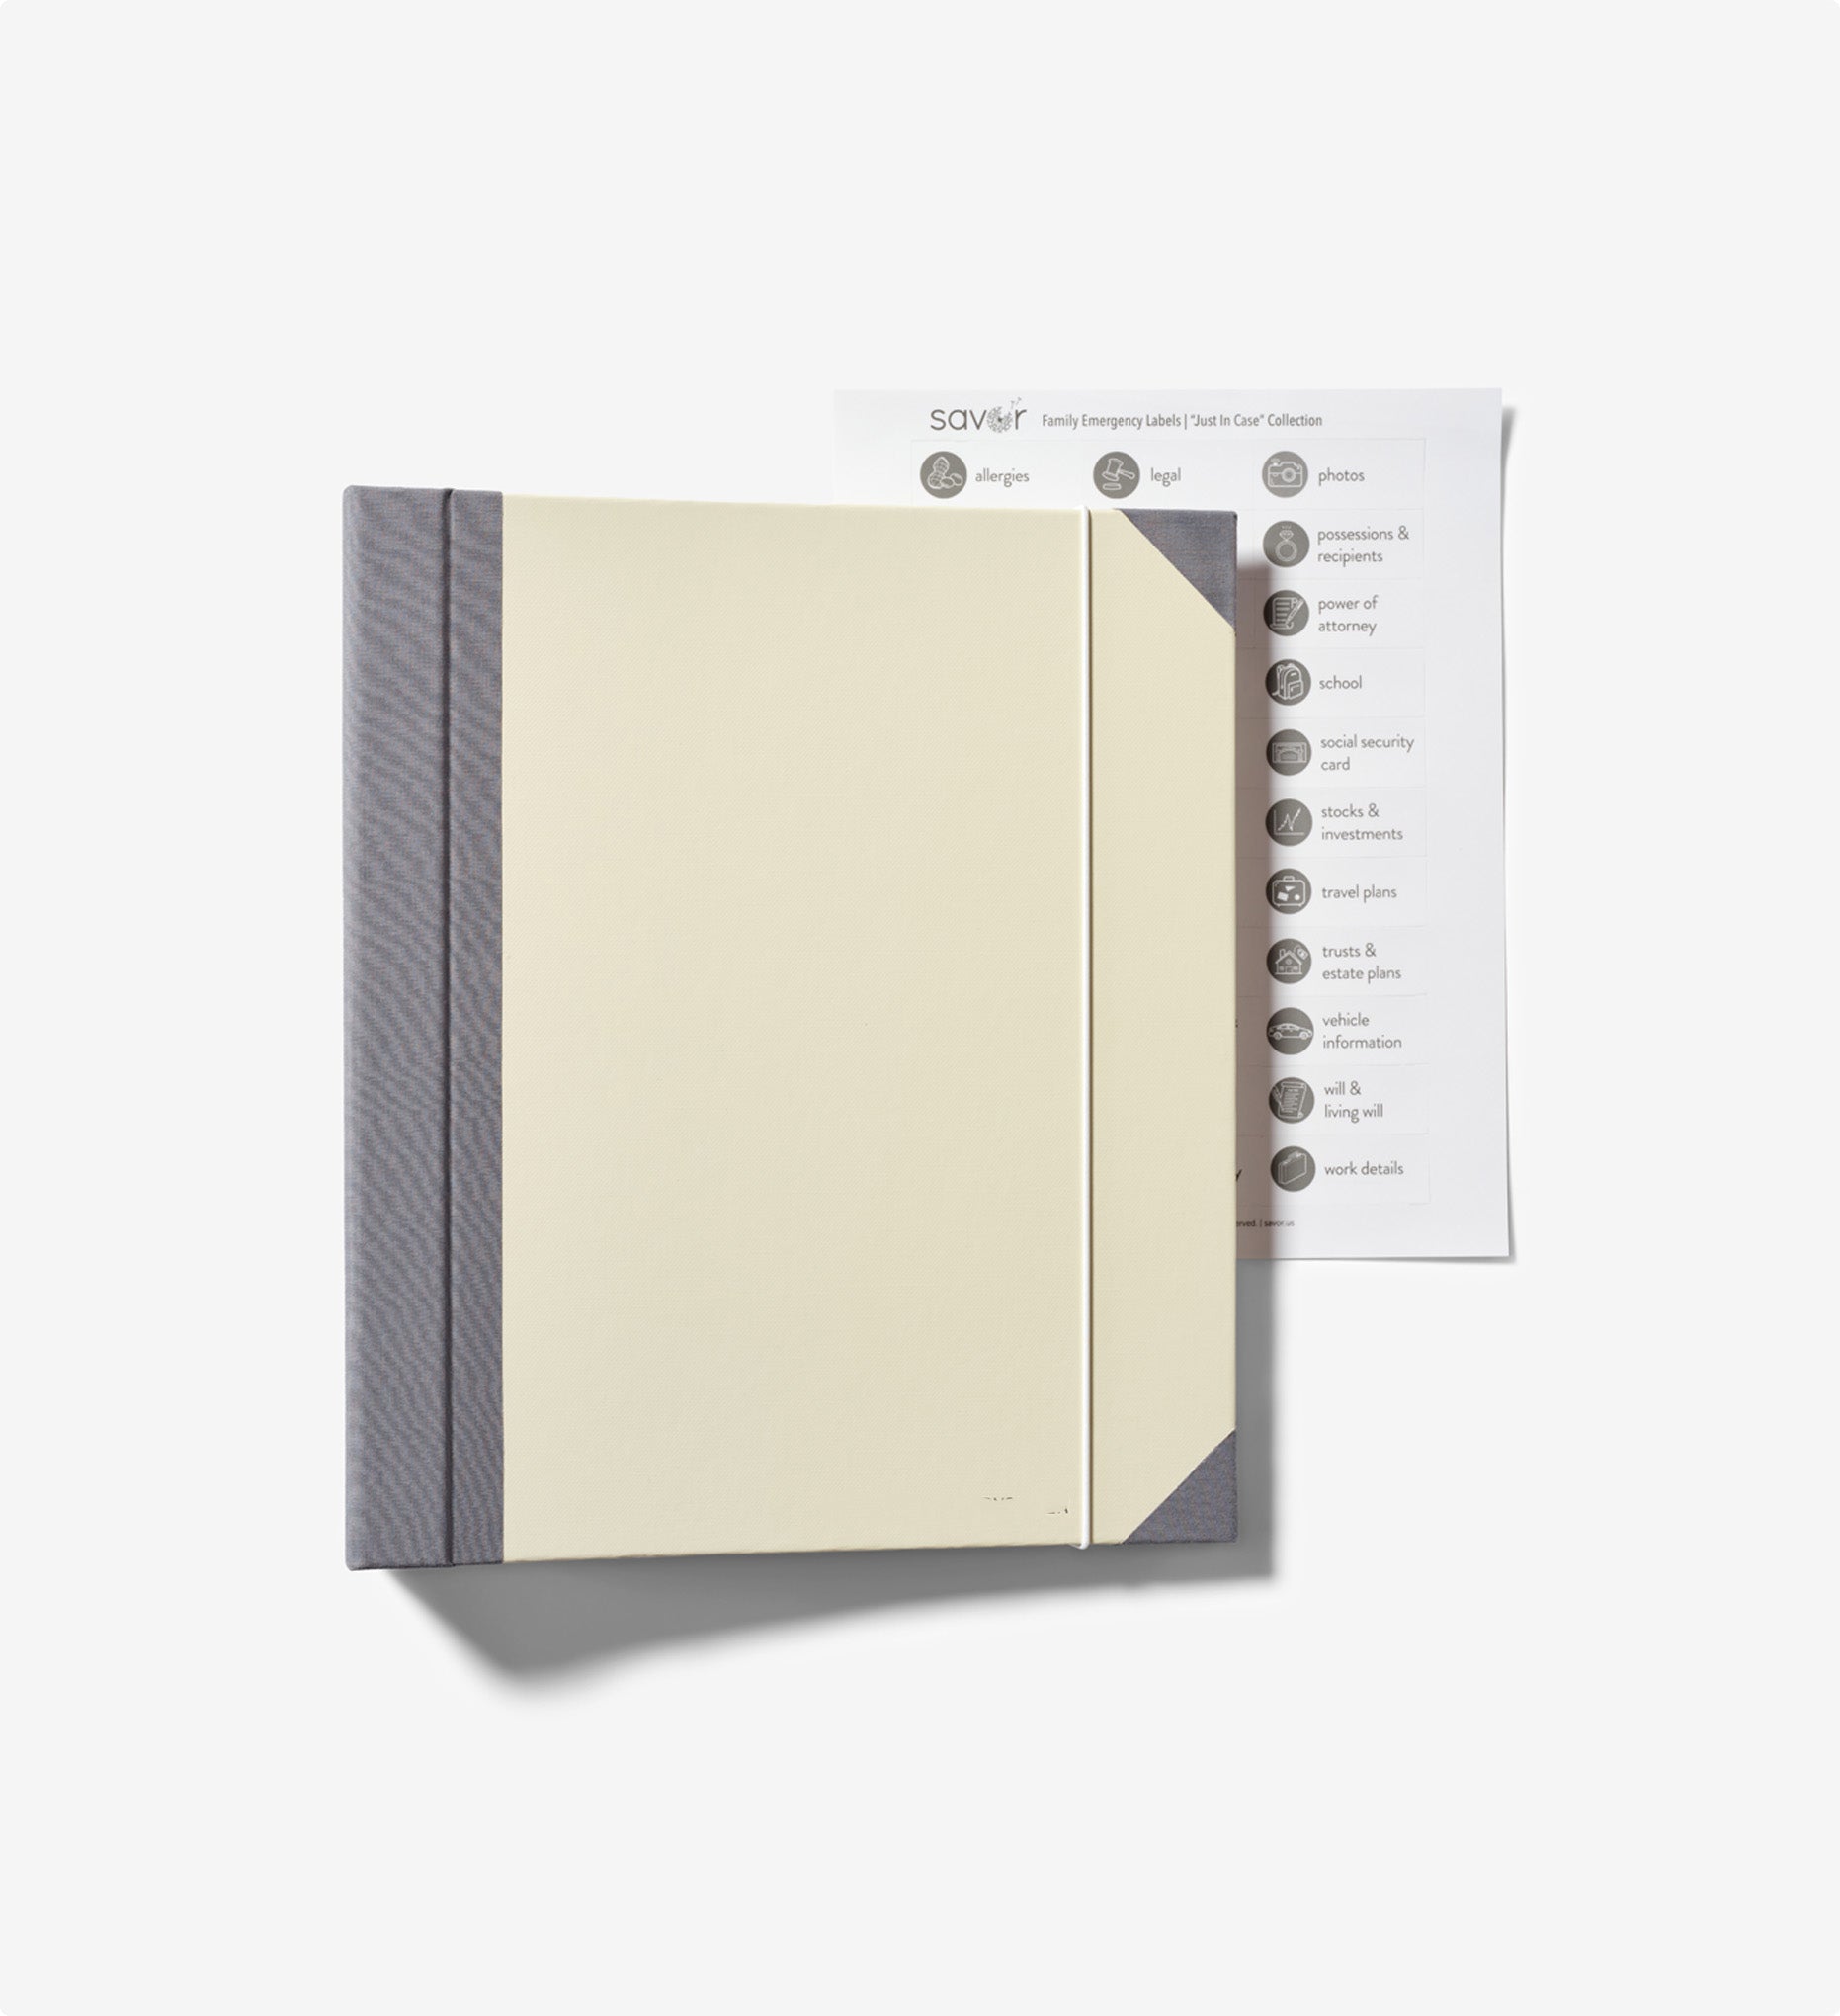 Large Capacity 3-Ring Binders for Lawyers